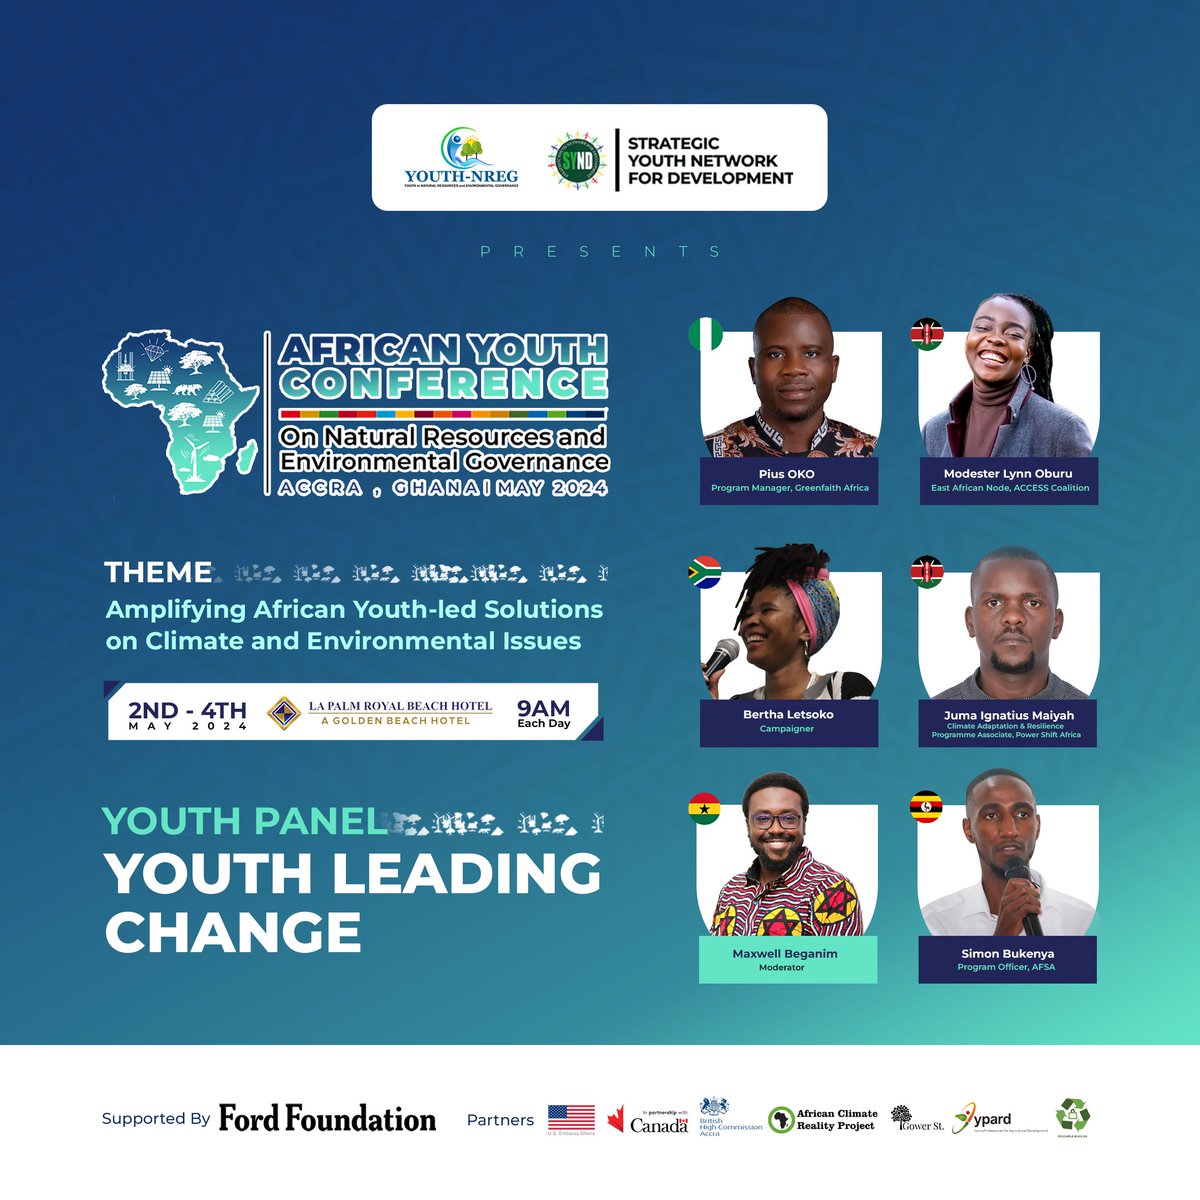 Five vibrant young people; One from the Giant of Africa, two from the Pride of Africa, another from the Pearl of Africa and the last from the Rainbow nation will gather at the African Youth Conference. 1/3 #AYC2024 #WeAreGathering